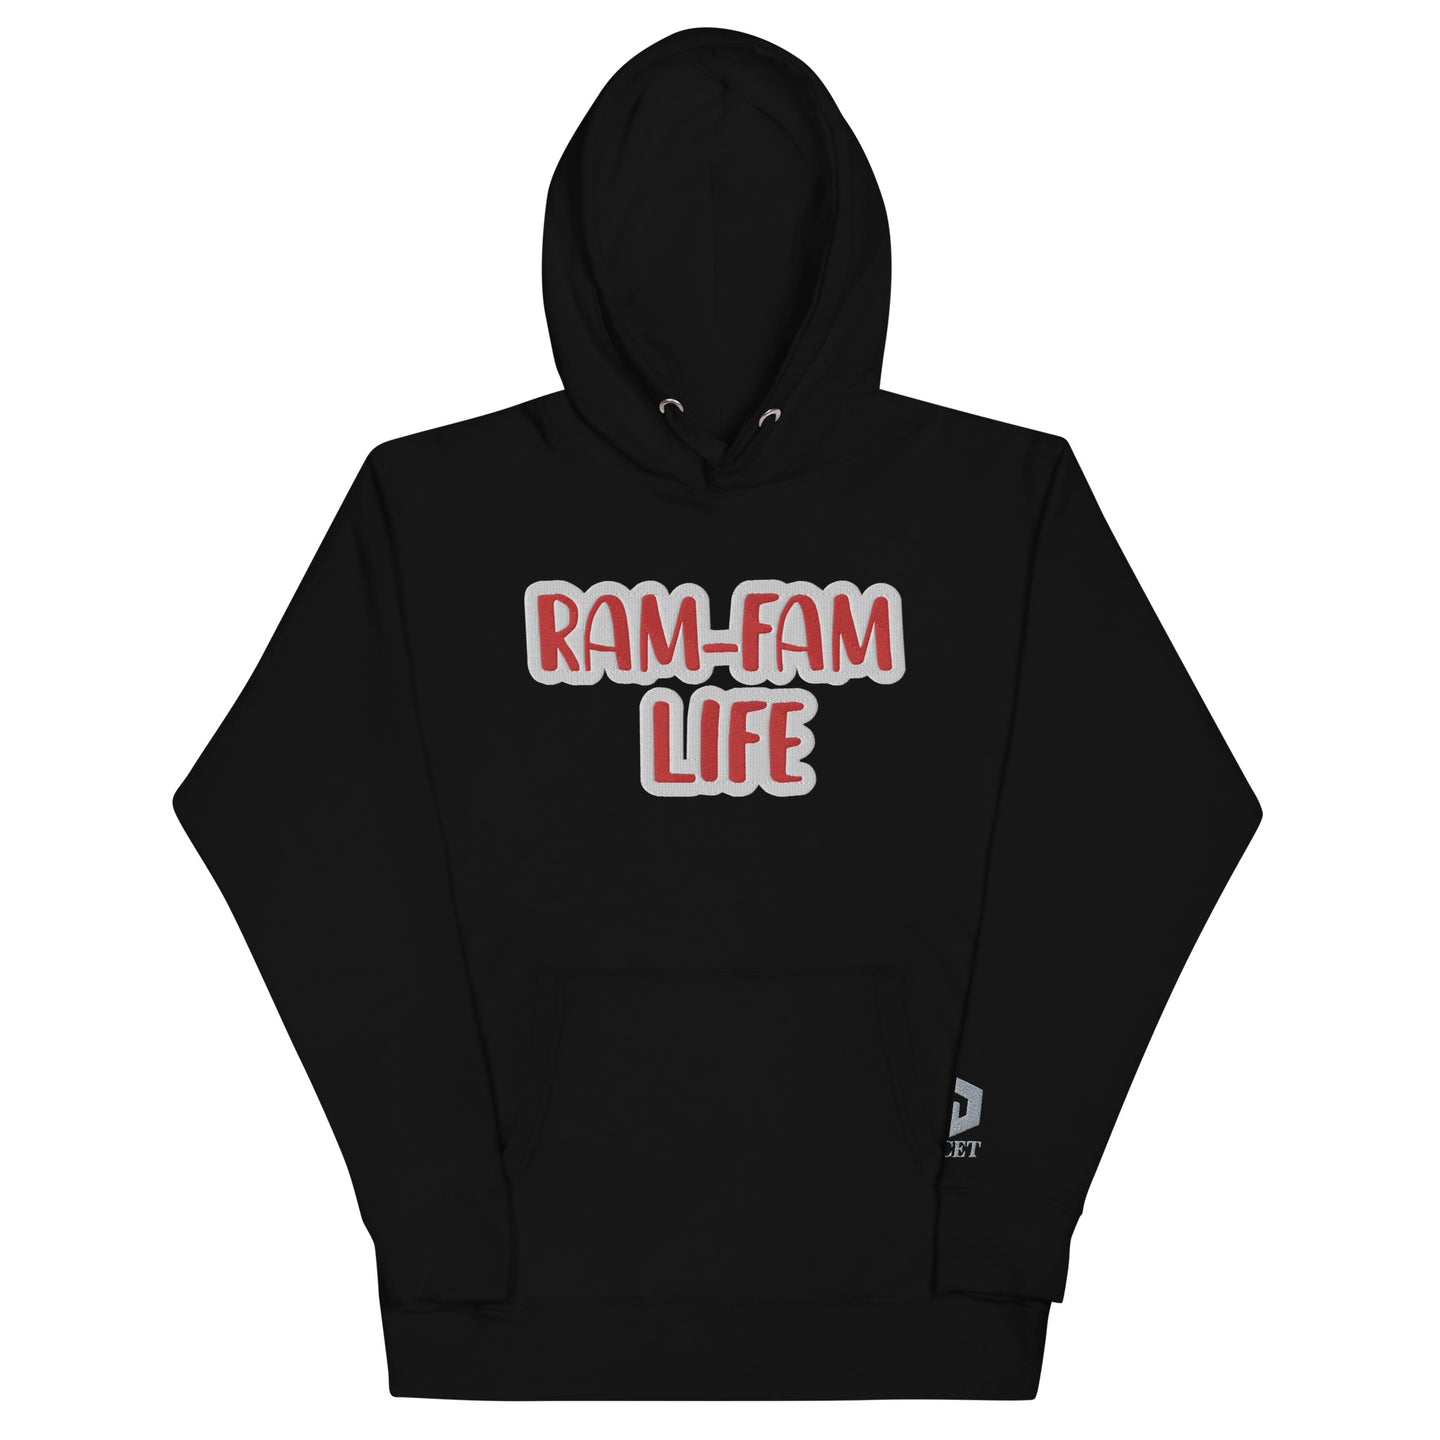 Ram-Fam Life Embroidery Hoodie by ReCet